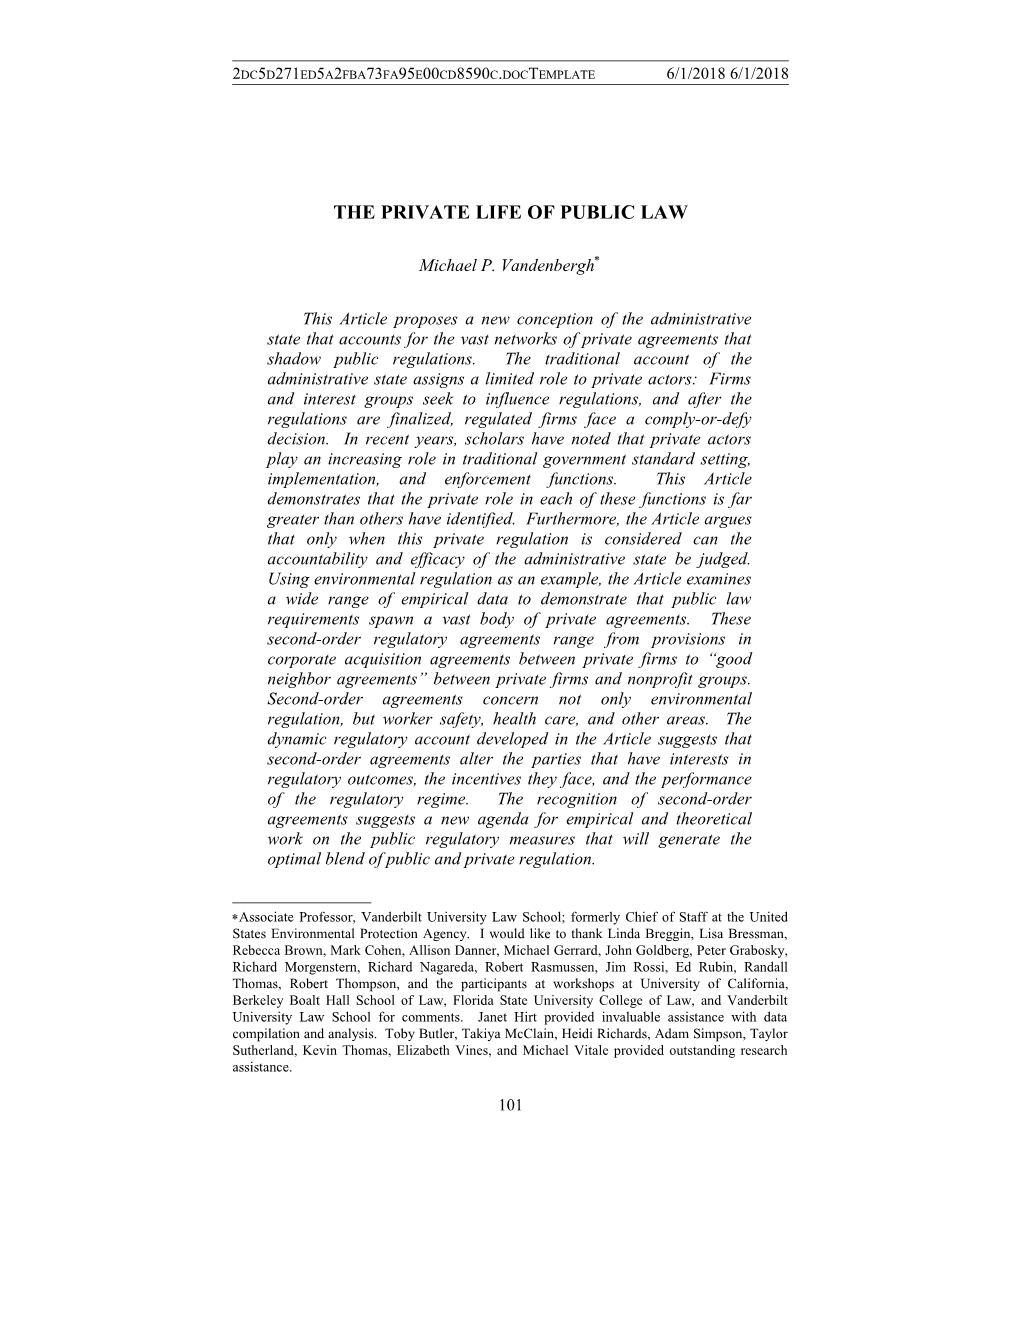 The Private Life of Public Law